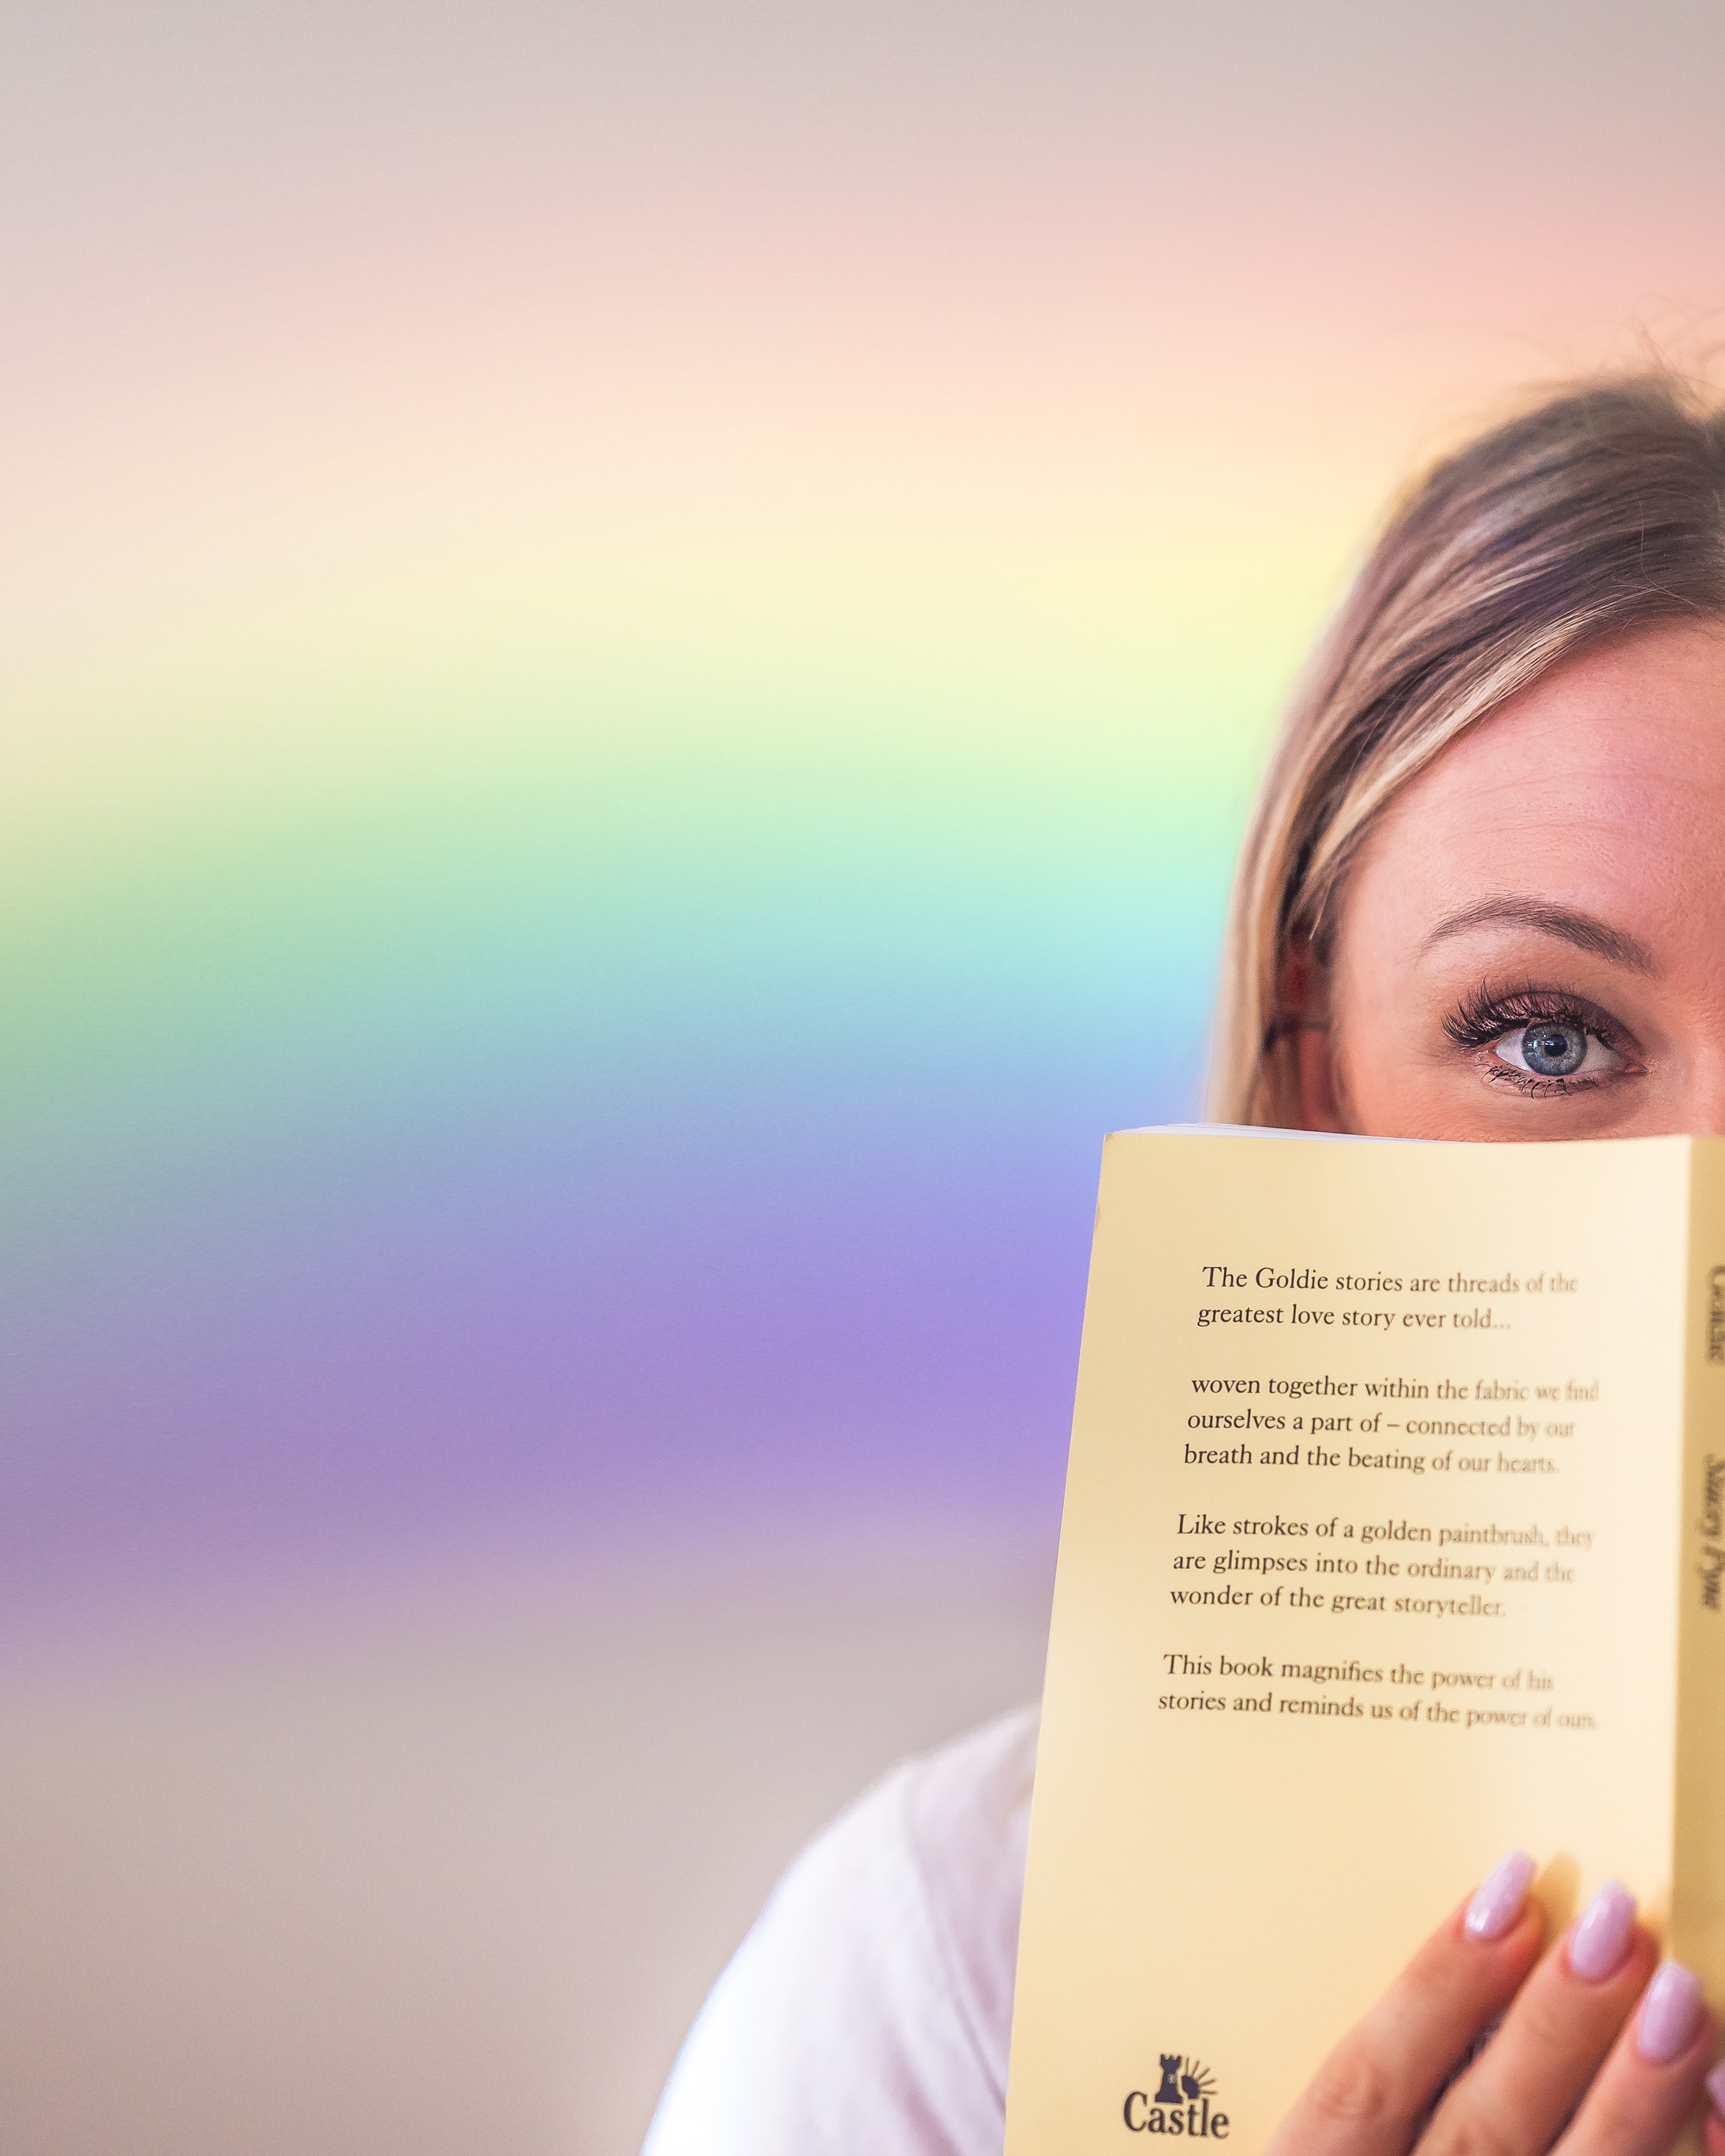 A woman holds a book up in front of her face with a rainbow behind her